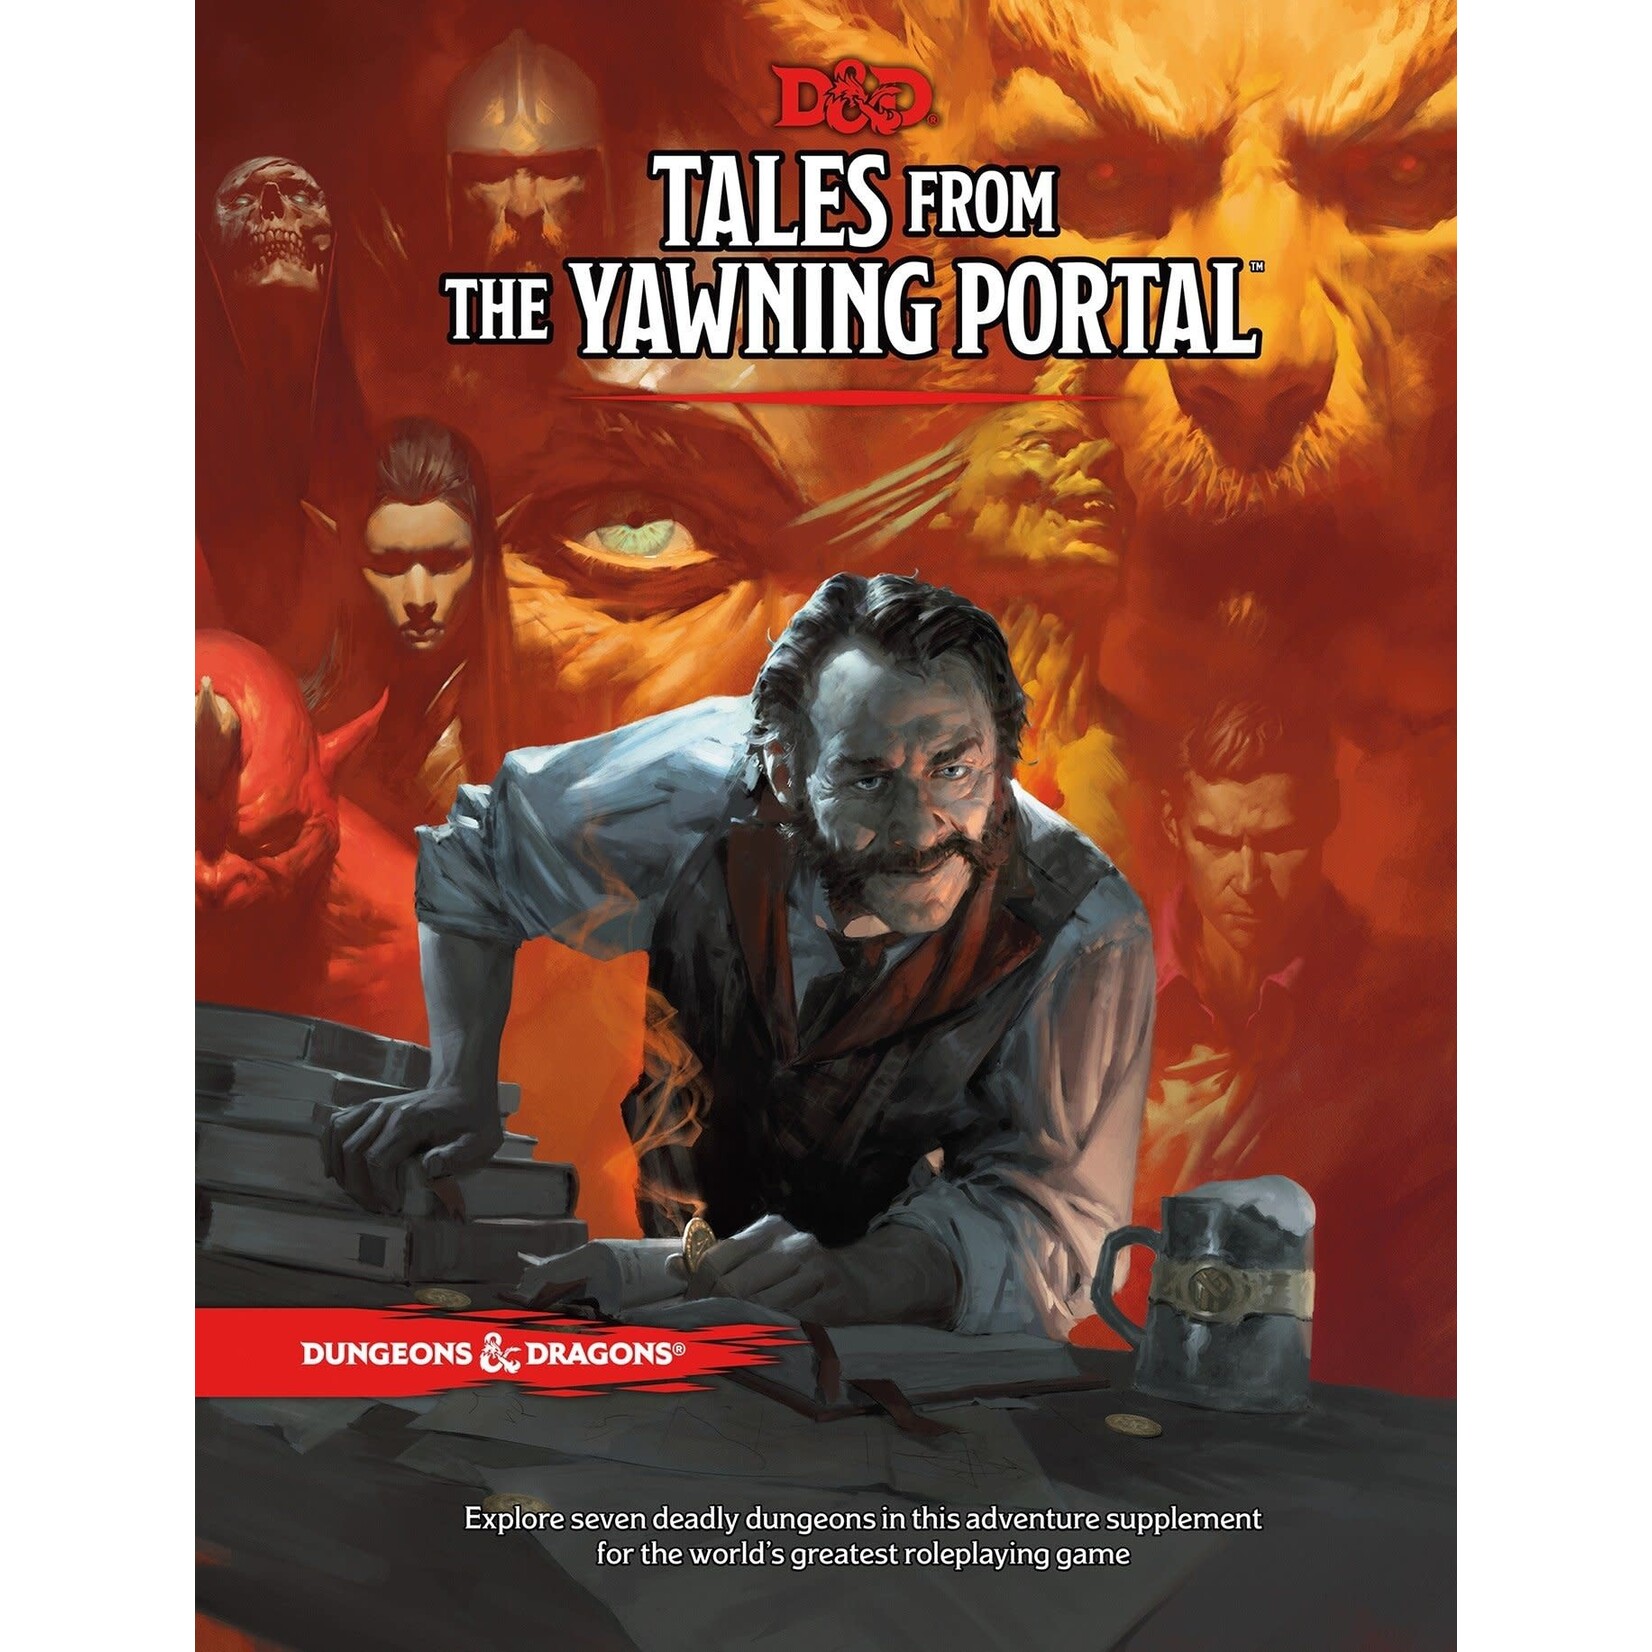 Wizards of the Coast DnD 5e Tales from the Yawning Portal